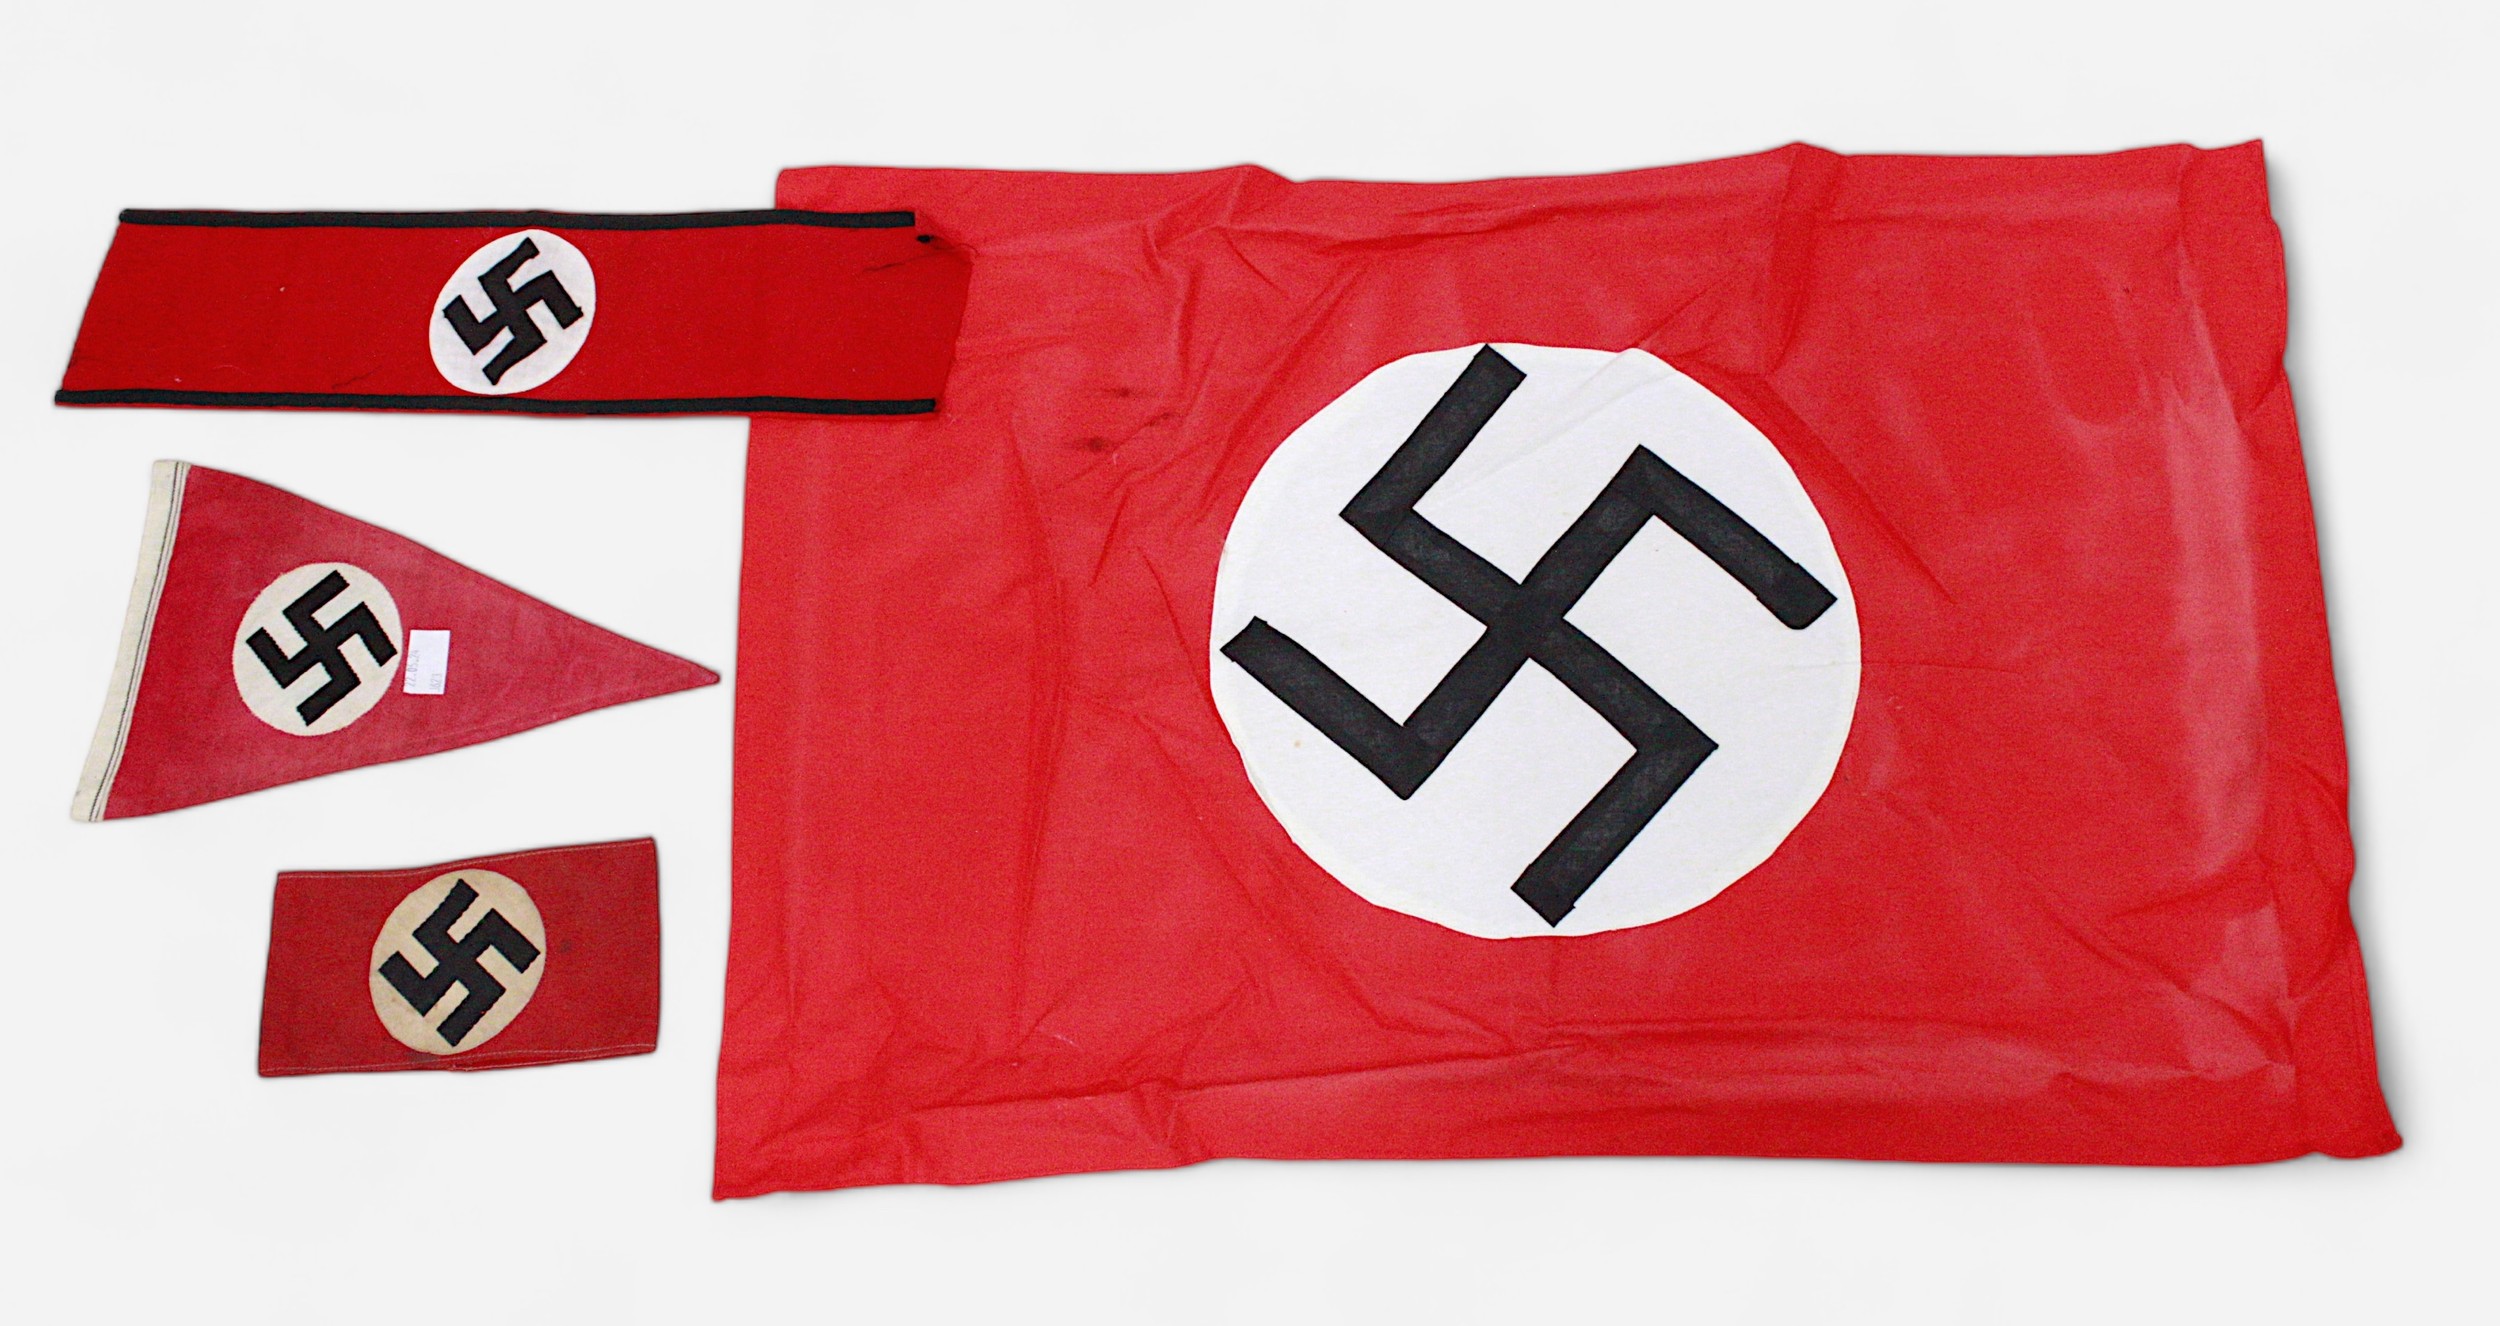 A WWII German Third Reich Swastika pennant, together with an armband, another felt armband and flag.